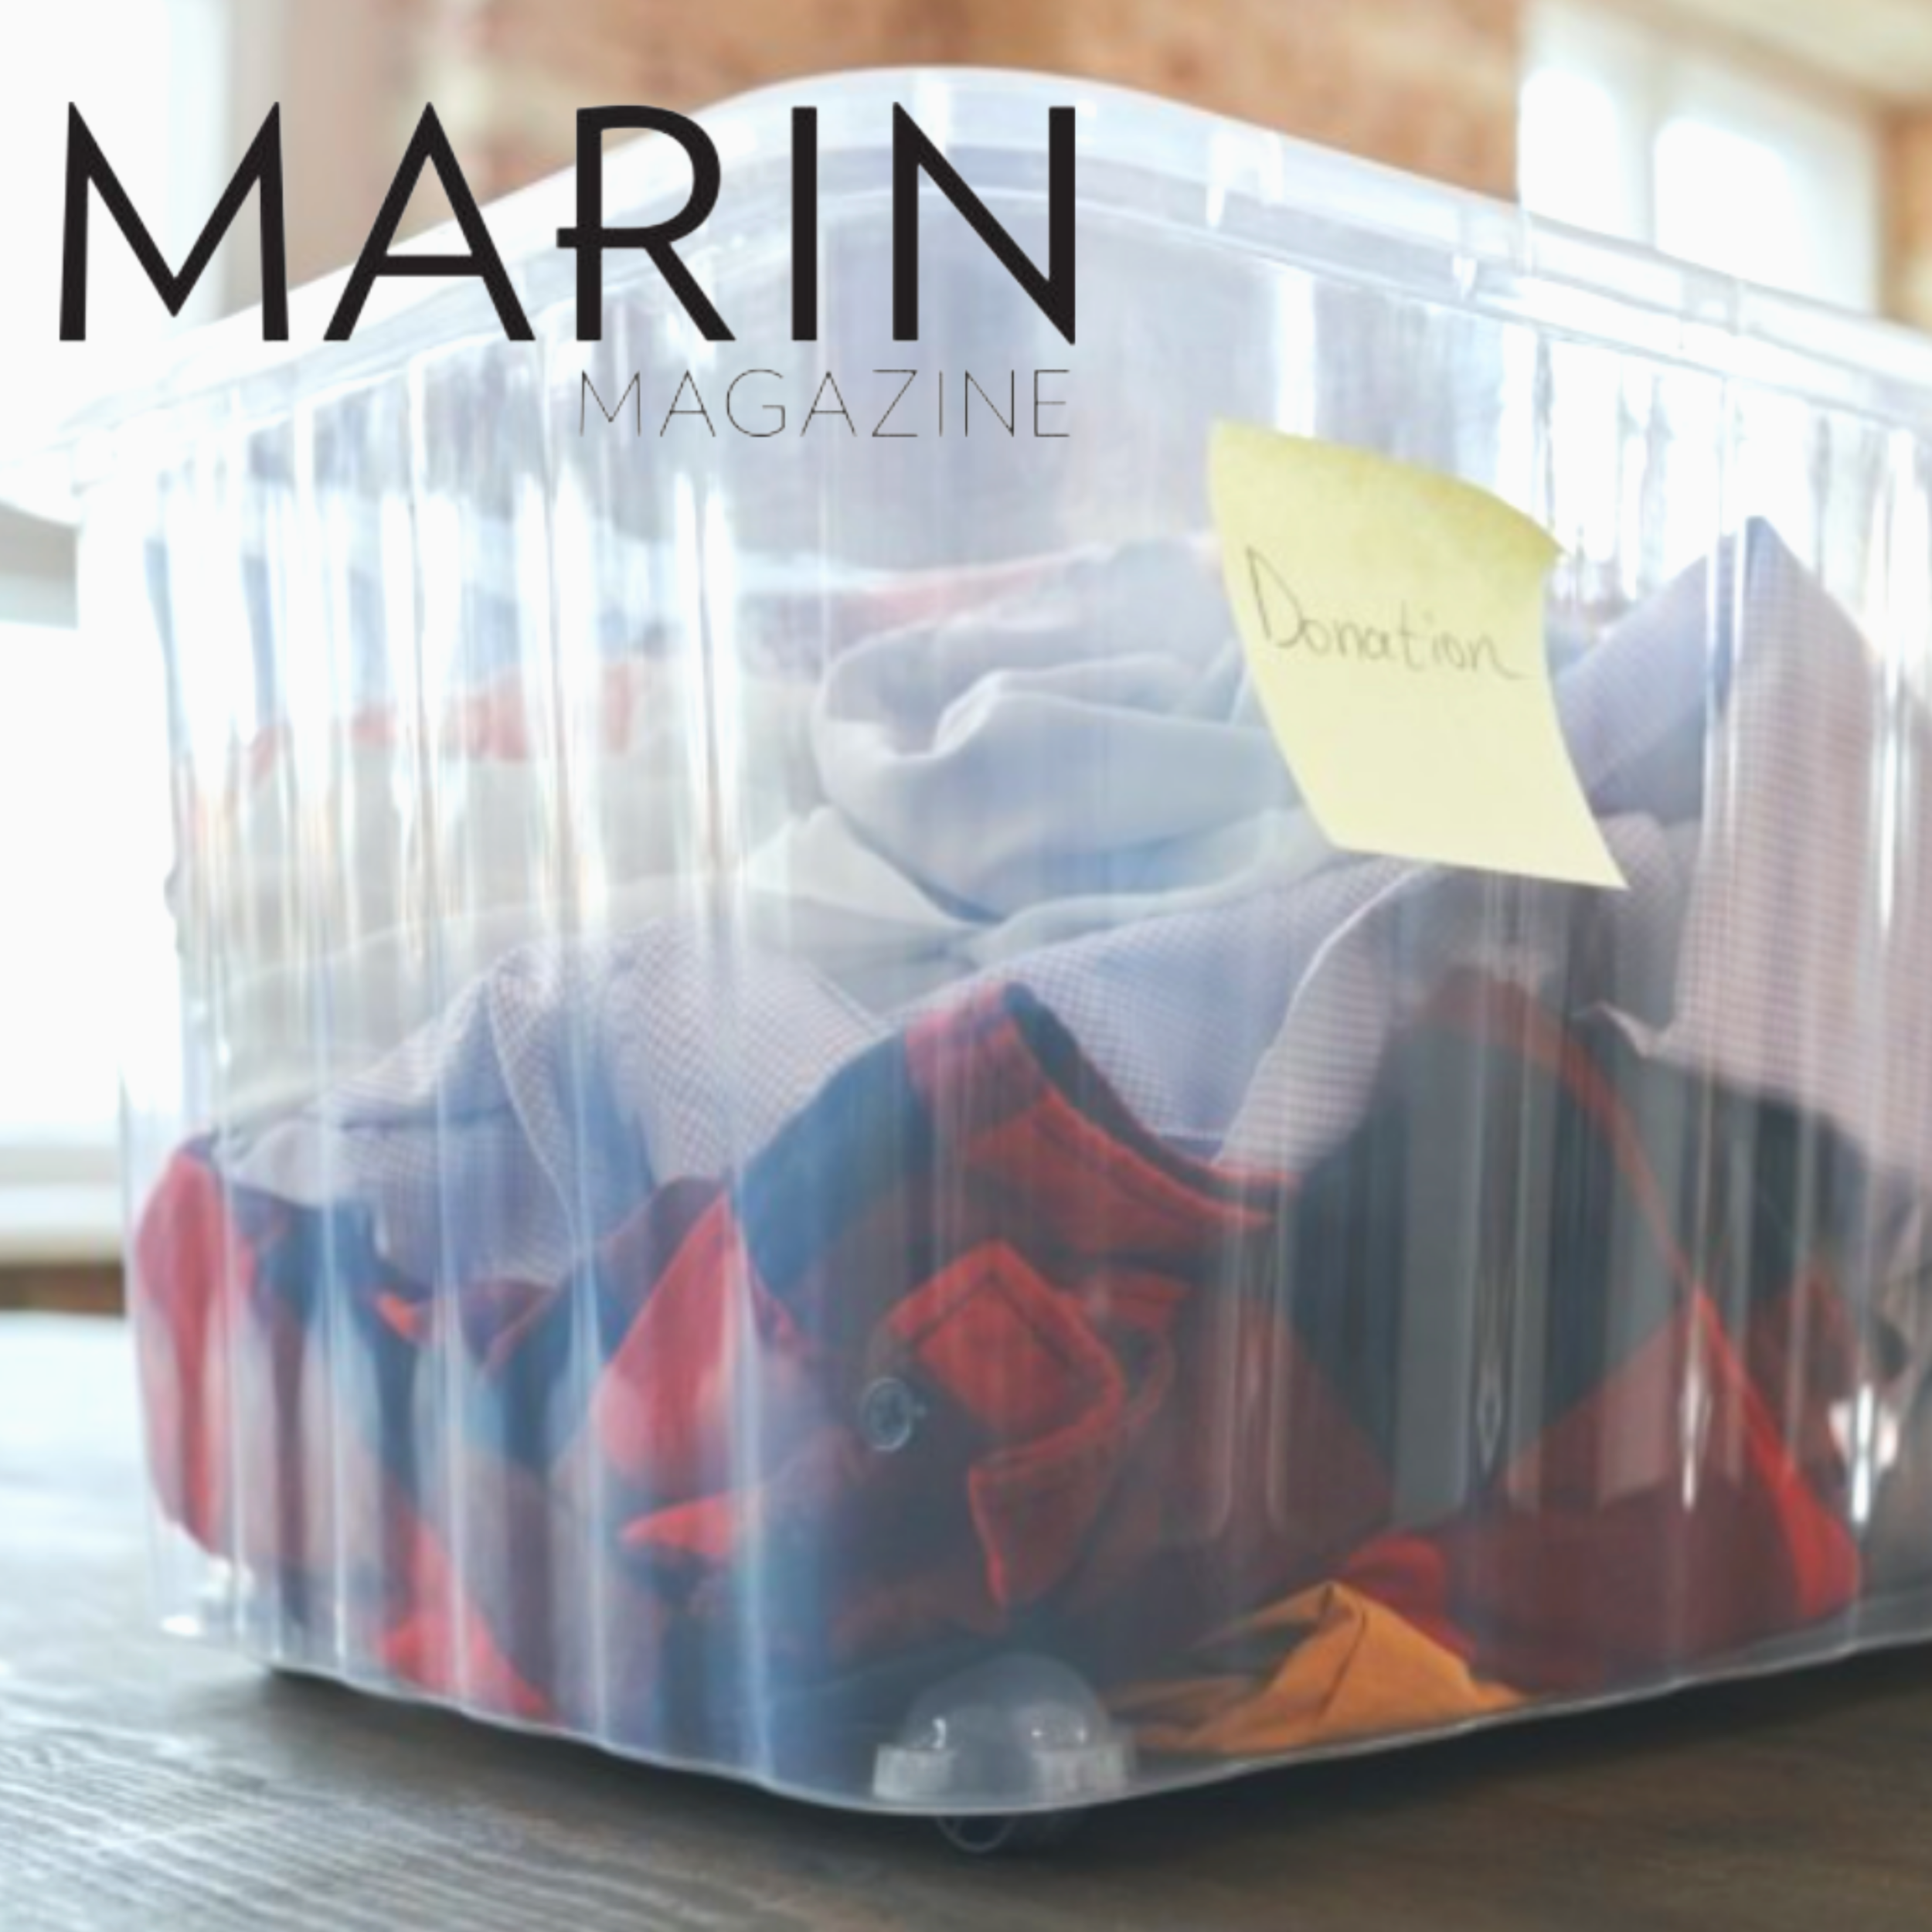 Marin Magazine: Make It Home is one of the best places in the Bay Area to donate furniture